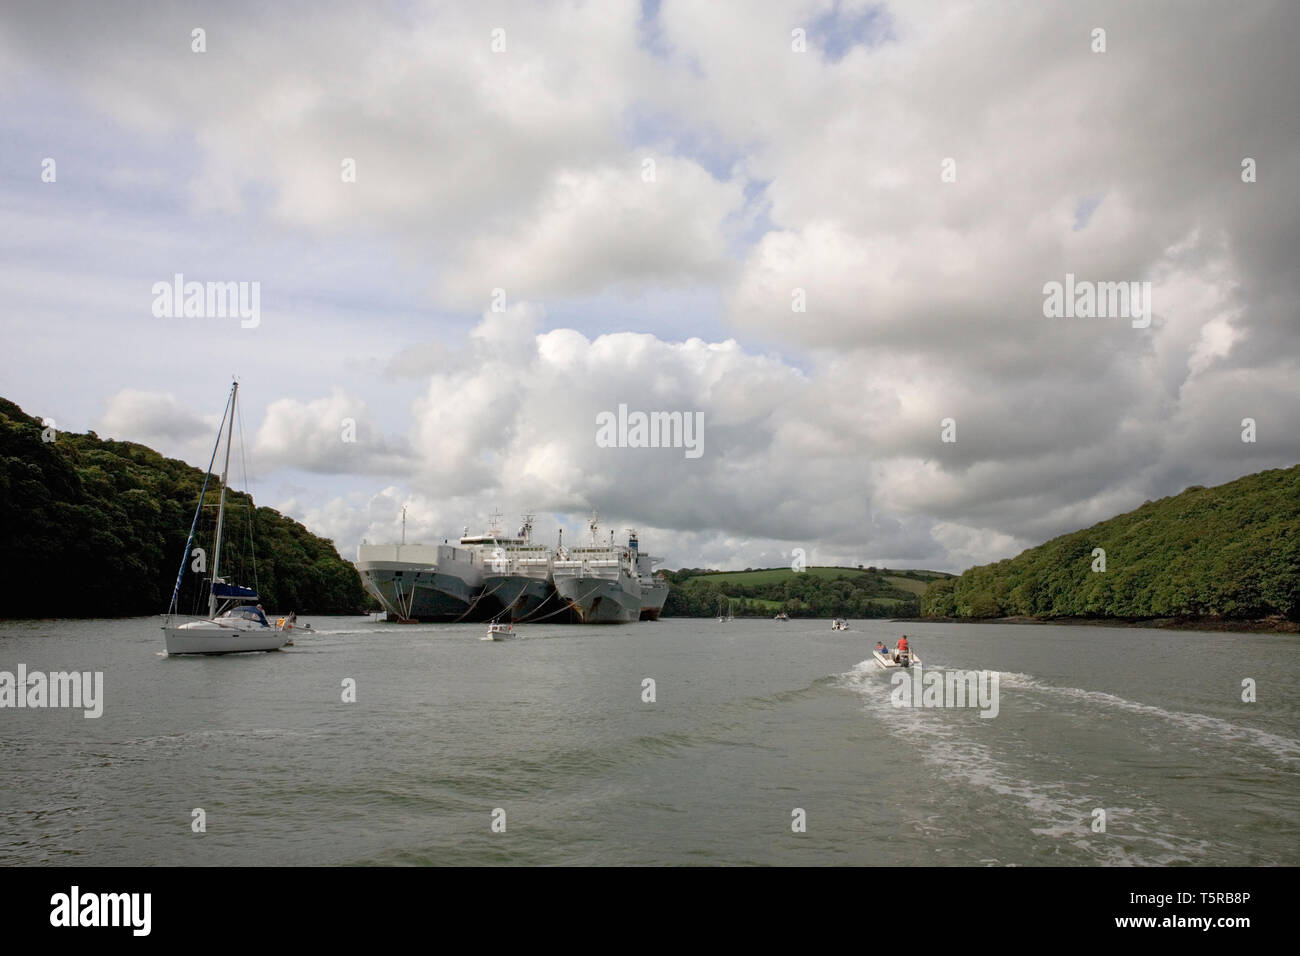 river fal at king harry ferry, with several huge car transporter ships laid up on moorings in the river Stock Photo